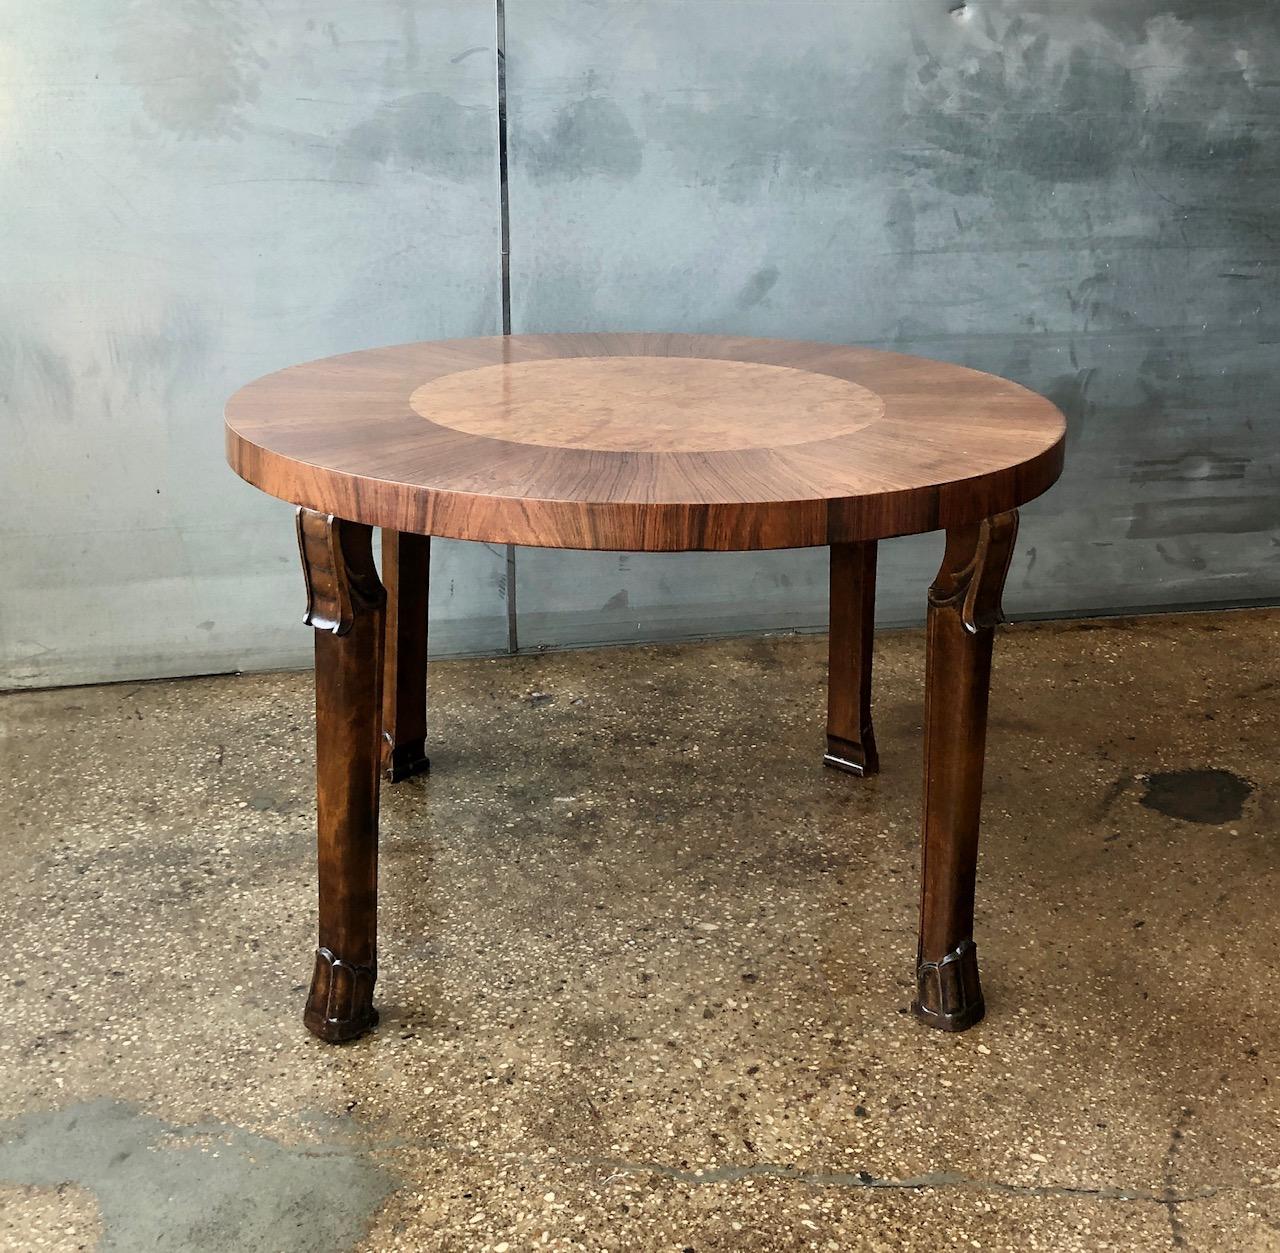 Large coffee or site table David Blomberg attributed. Sweden, Circa 1920-30th.
Stained birch with burl veneered table top.
The table top recently refinished.